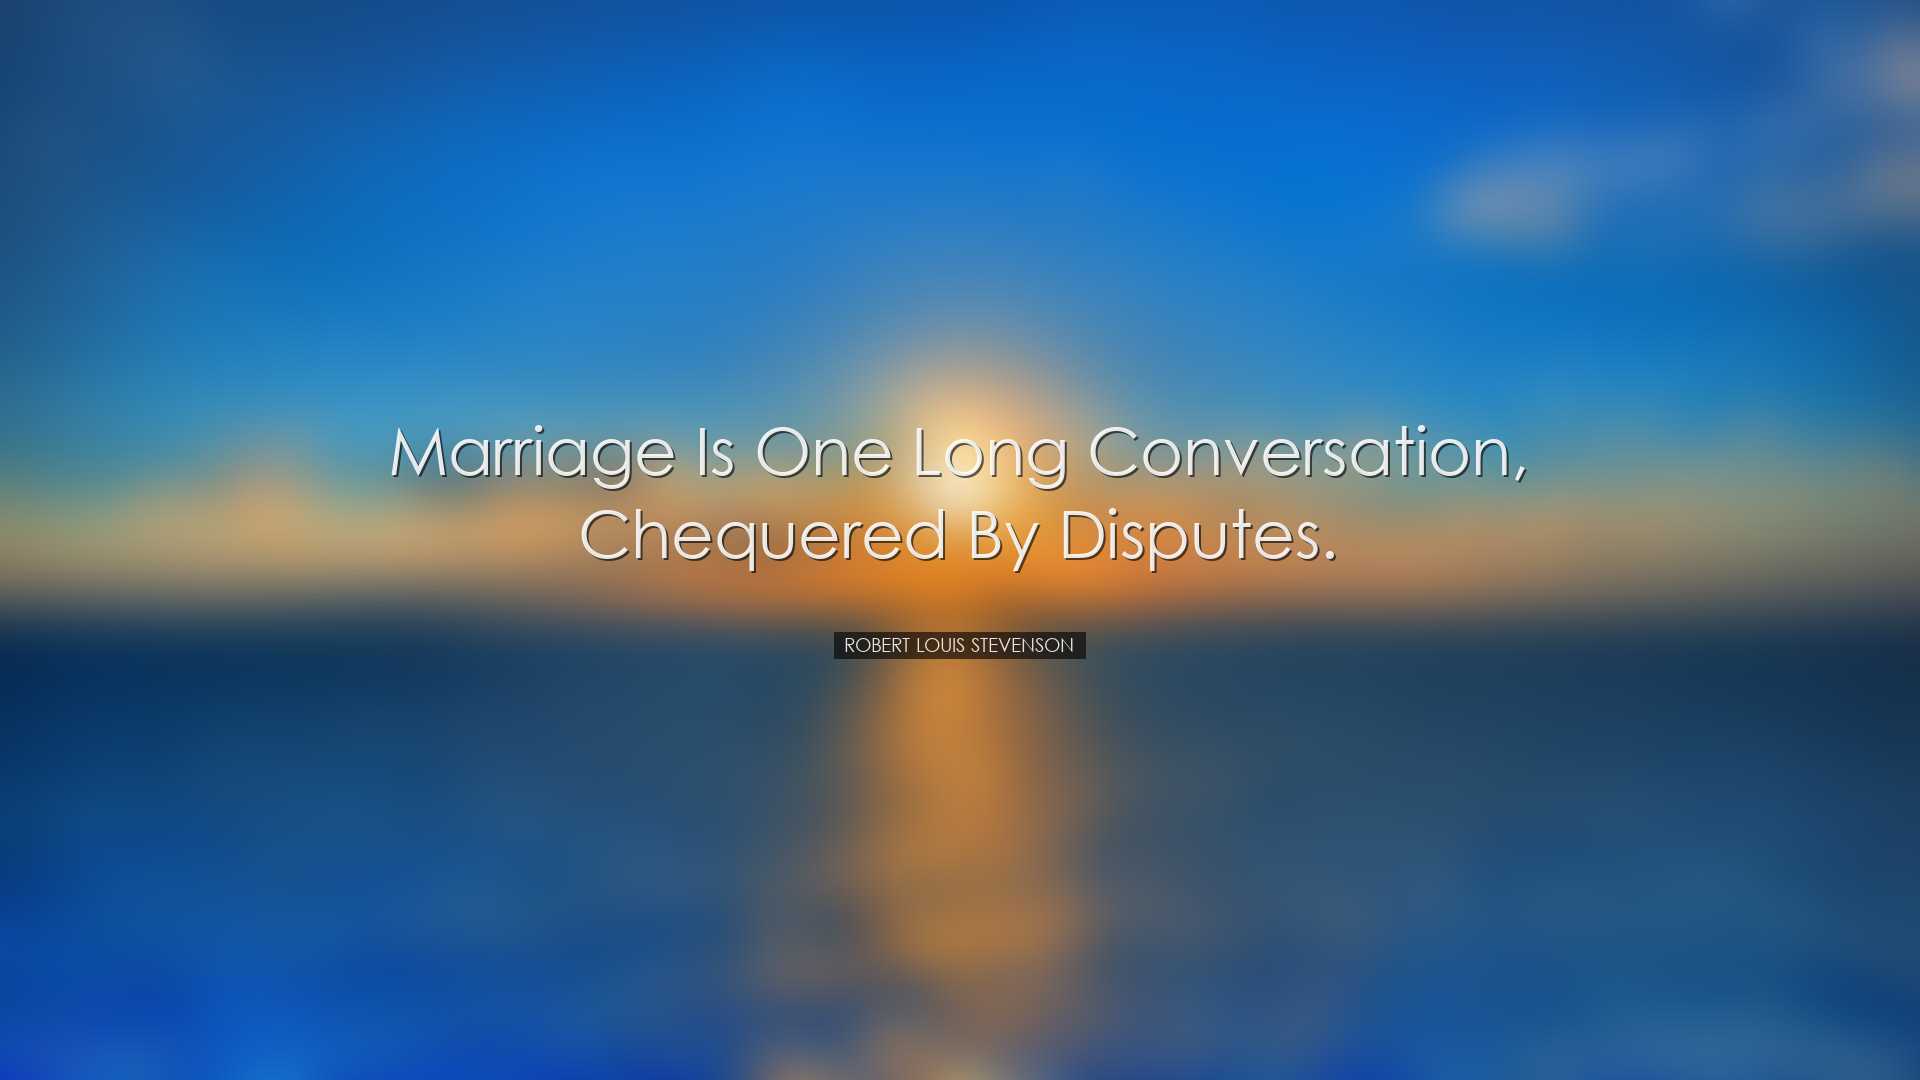 Marriage is one long conversation, chequered by disputes. - Robert